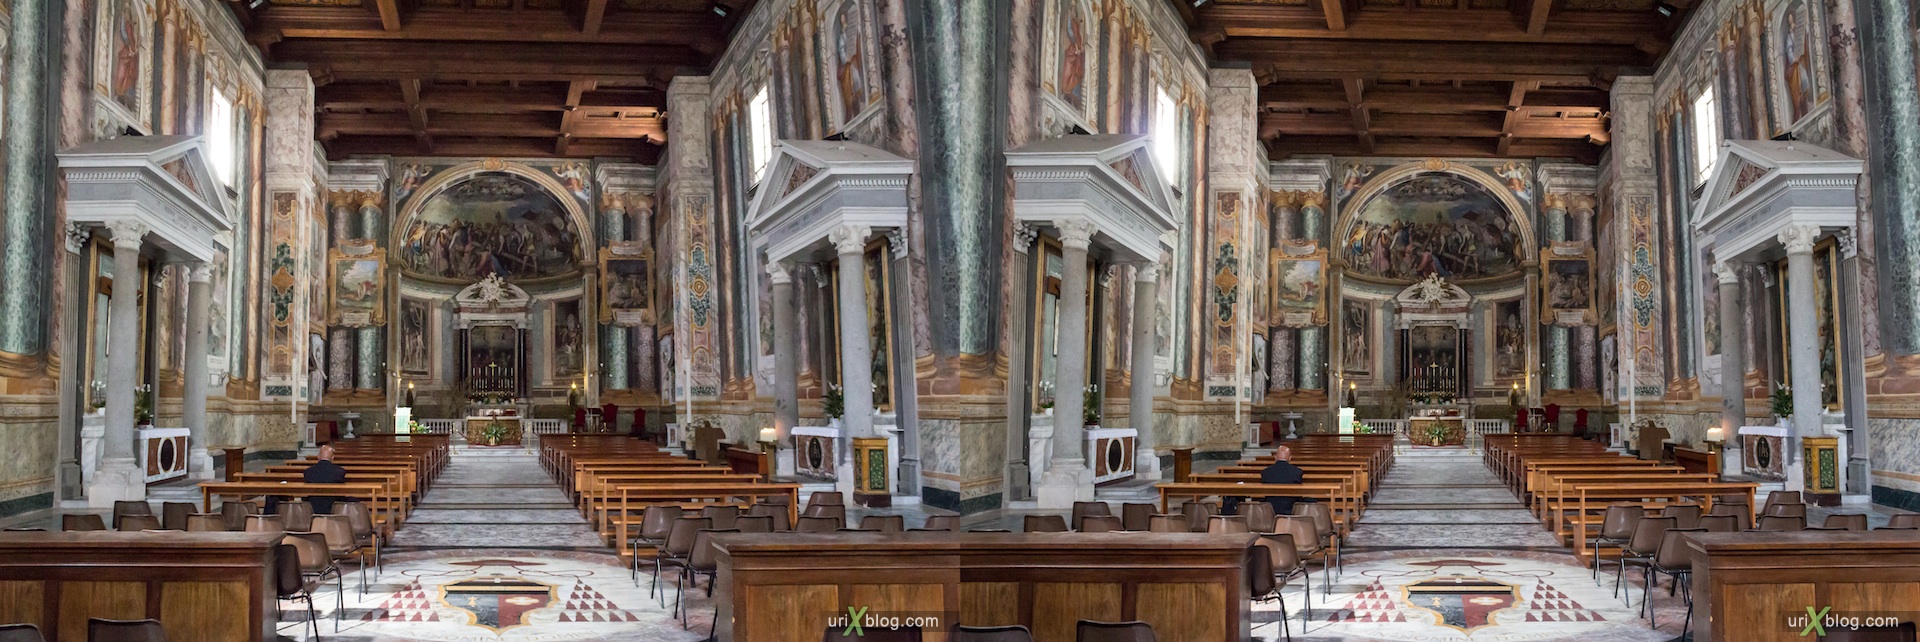 2012, church of San Vitale, Rome, Italy, cathedral, monastery, Christianity, Catholicism, 3D, stereo pair, cross-eyed, crossview, cross view stereo pair